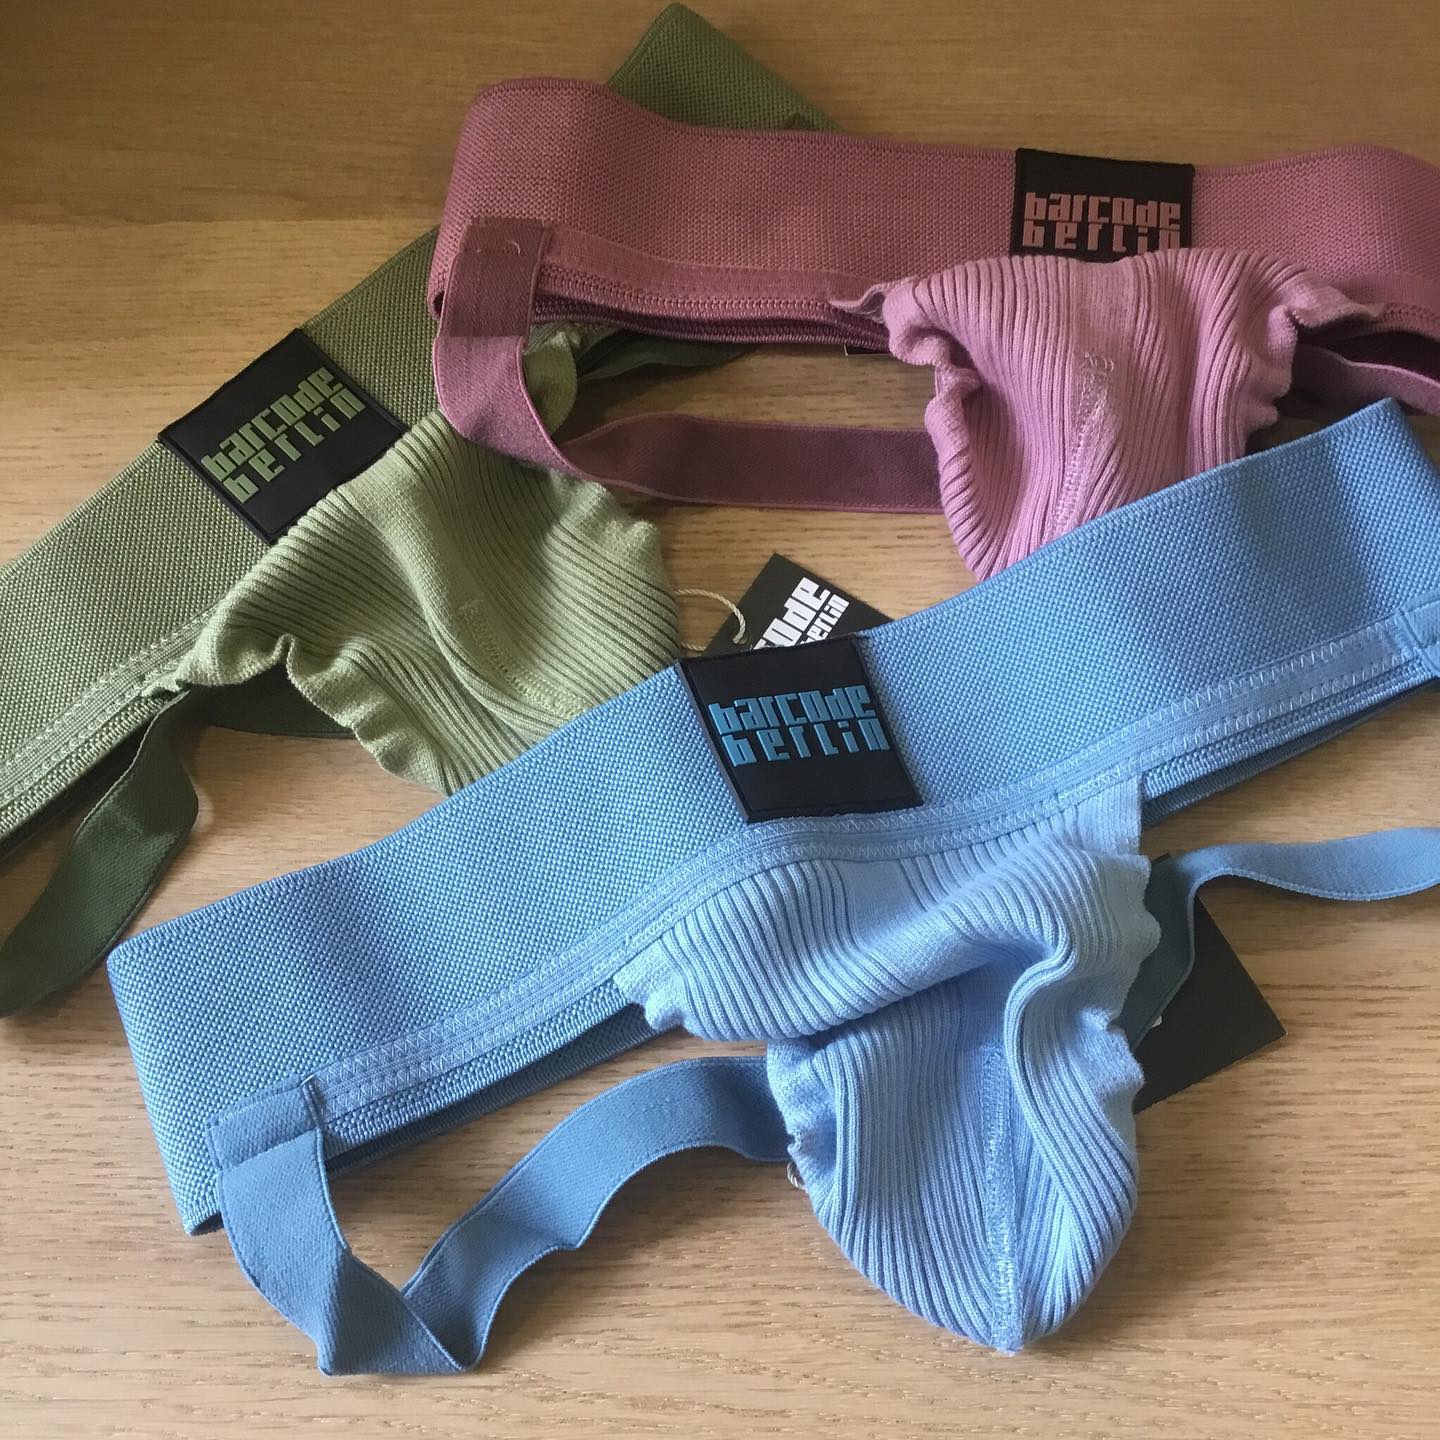 They are flying off our shelves! The new, limited edition Sergey Pop jockstraps stock is running low. Check them out and choose your favourite colours from all jocks from Barcode Berlin in this style:
______
menandunderwear.com/shop